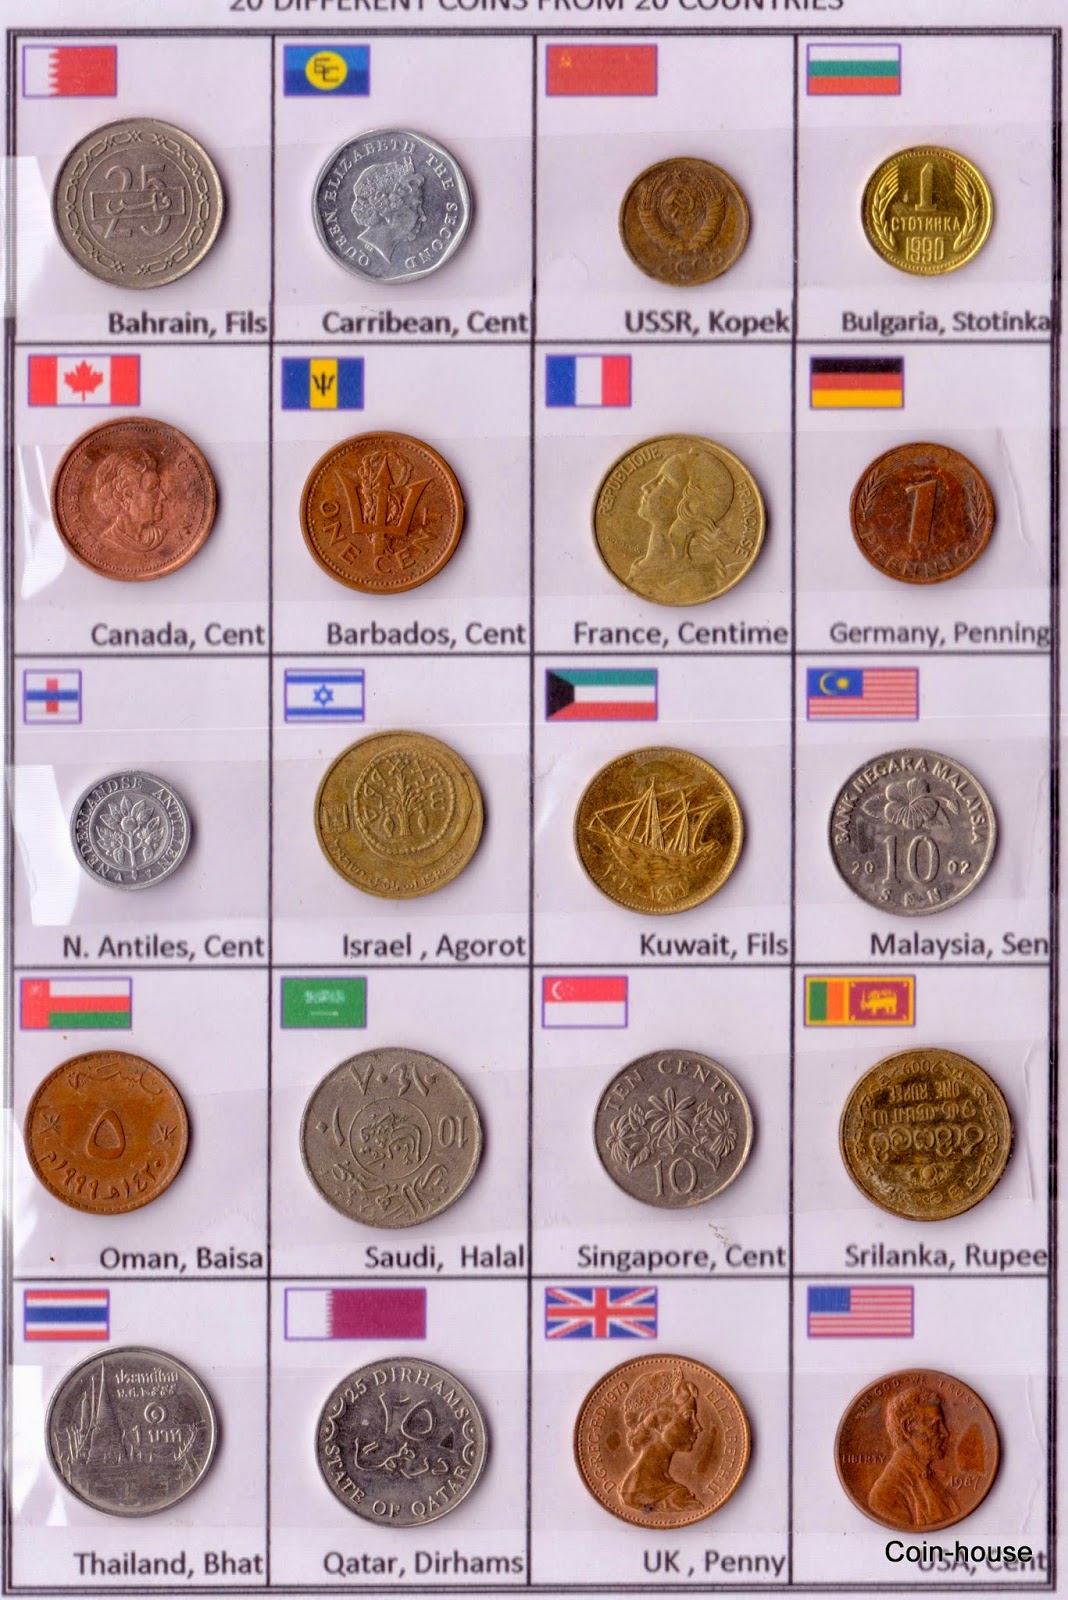 CoinHouse 20 World Coins from 20 Different Countries